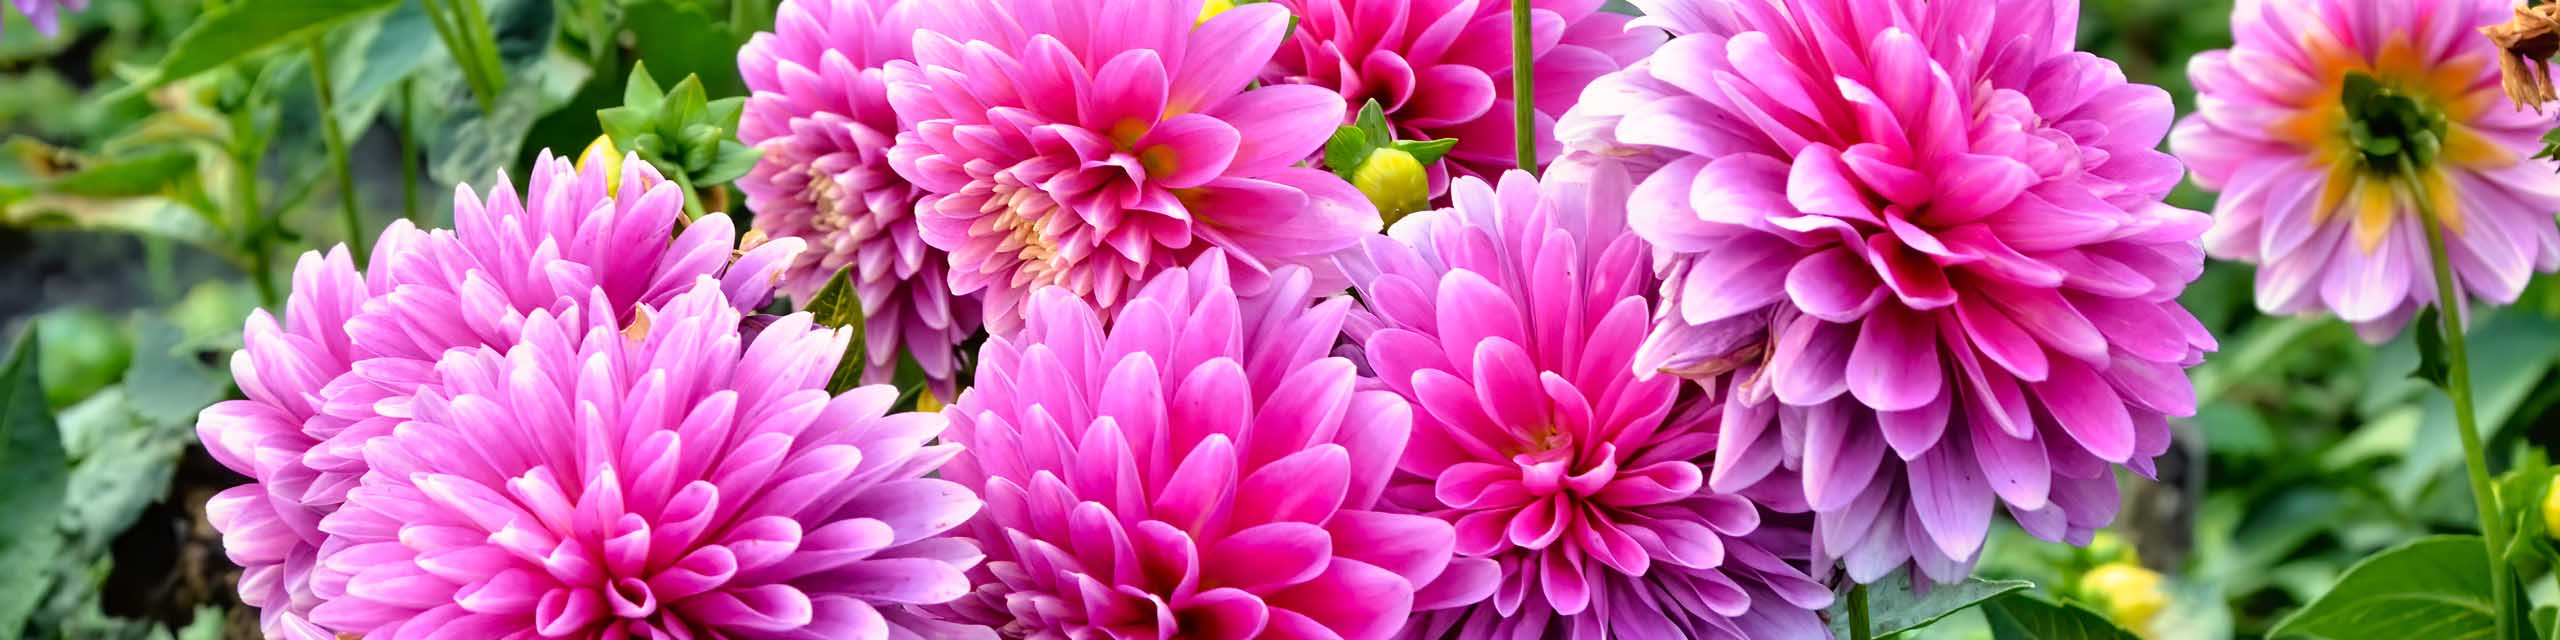 Close up of pink double petaled fancy dahlia flowers.